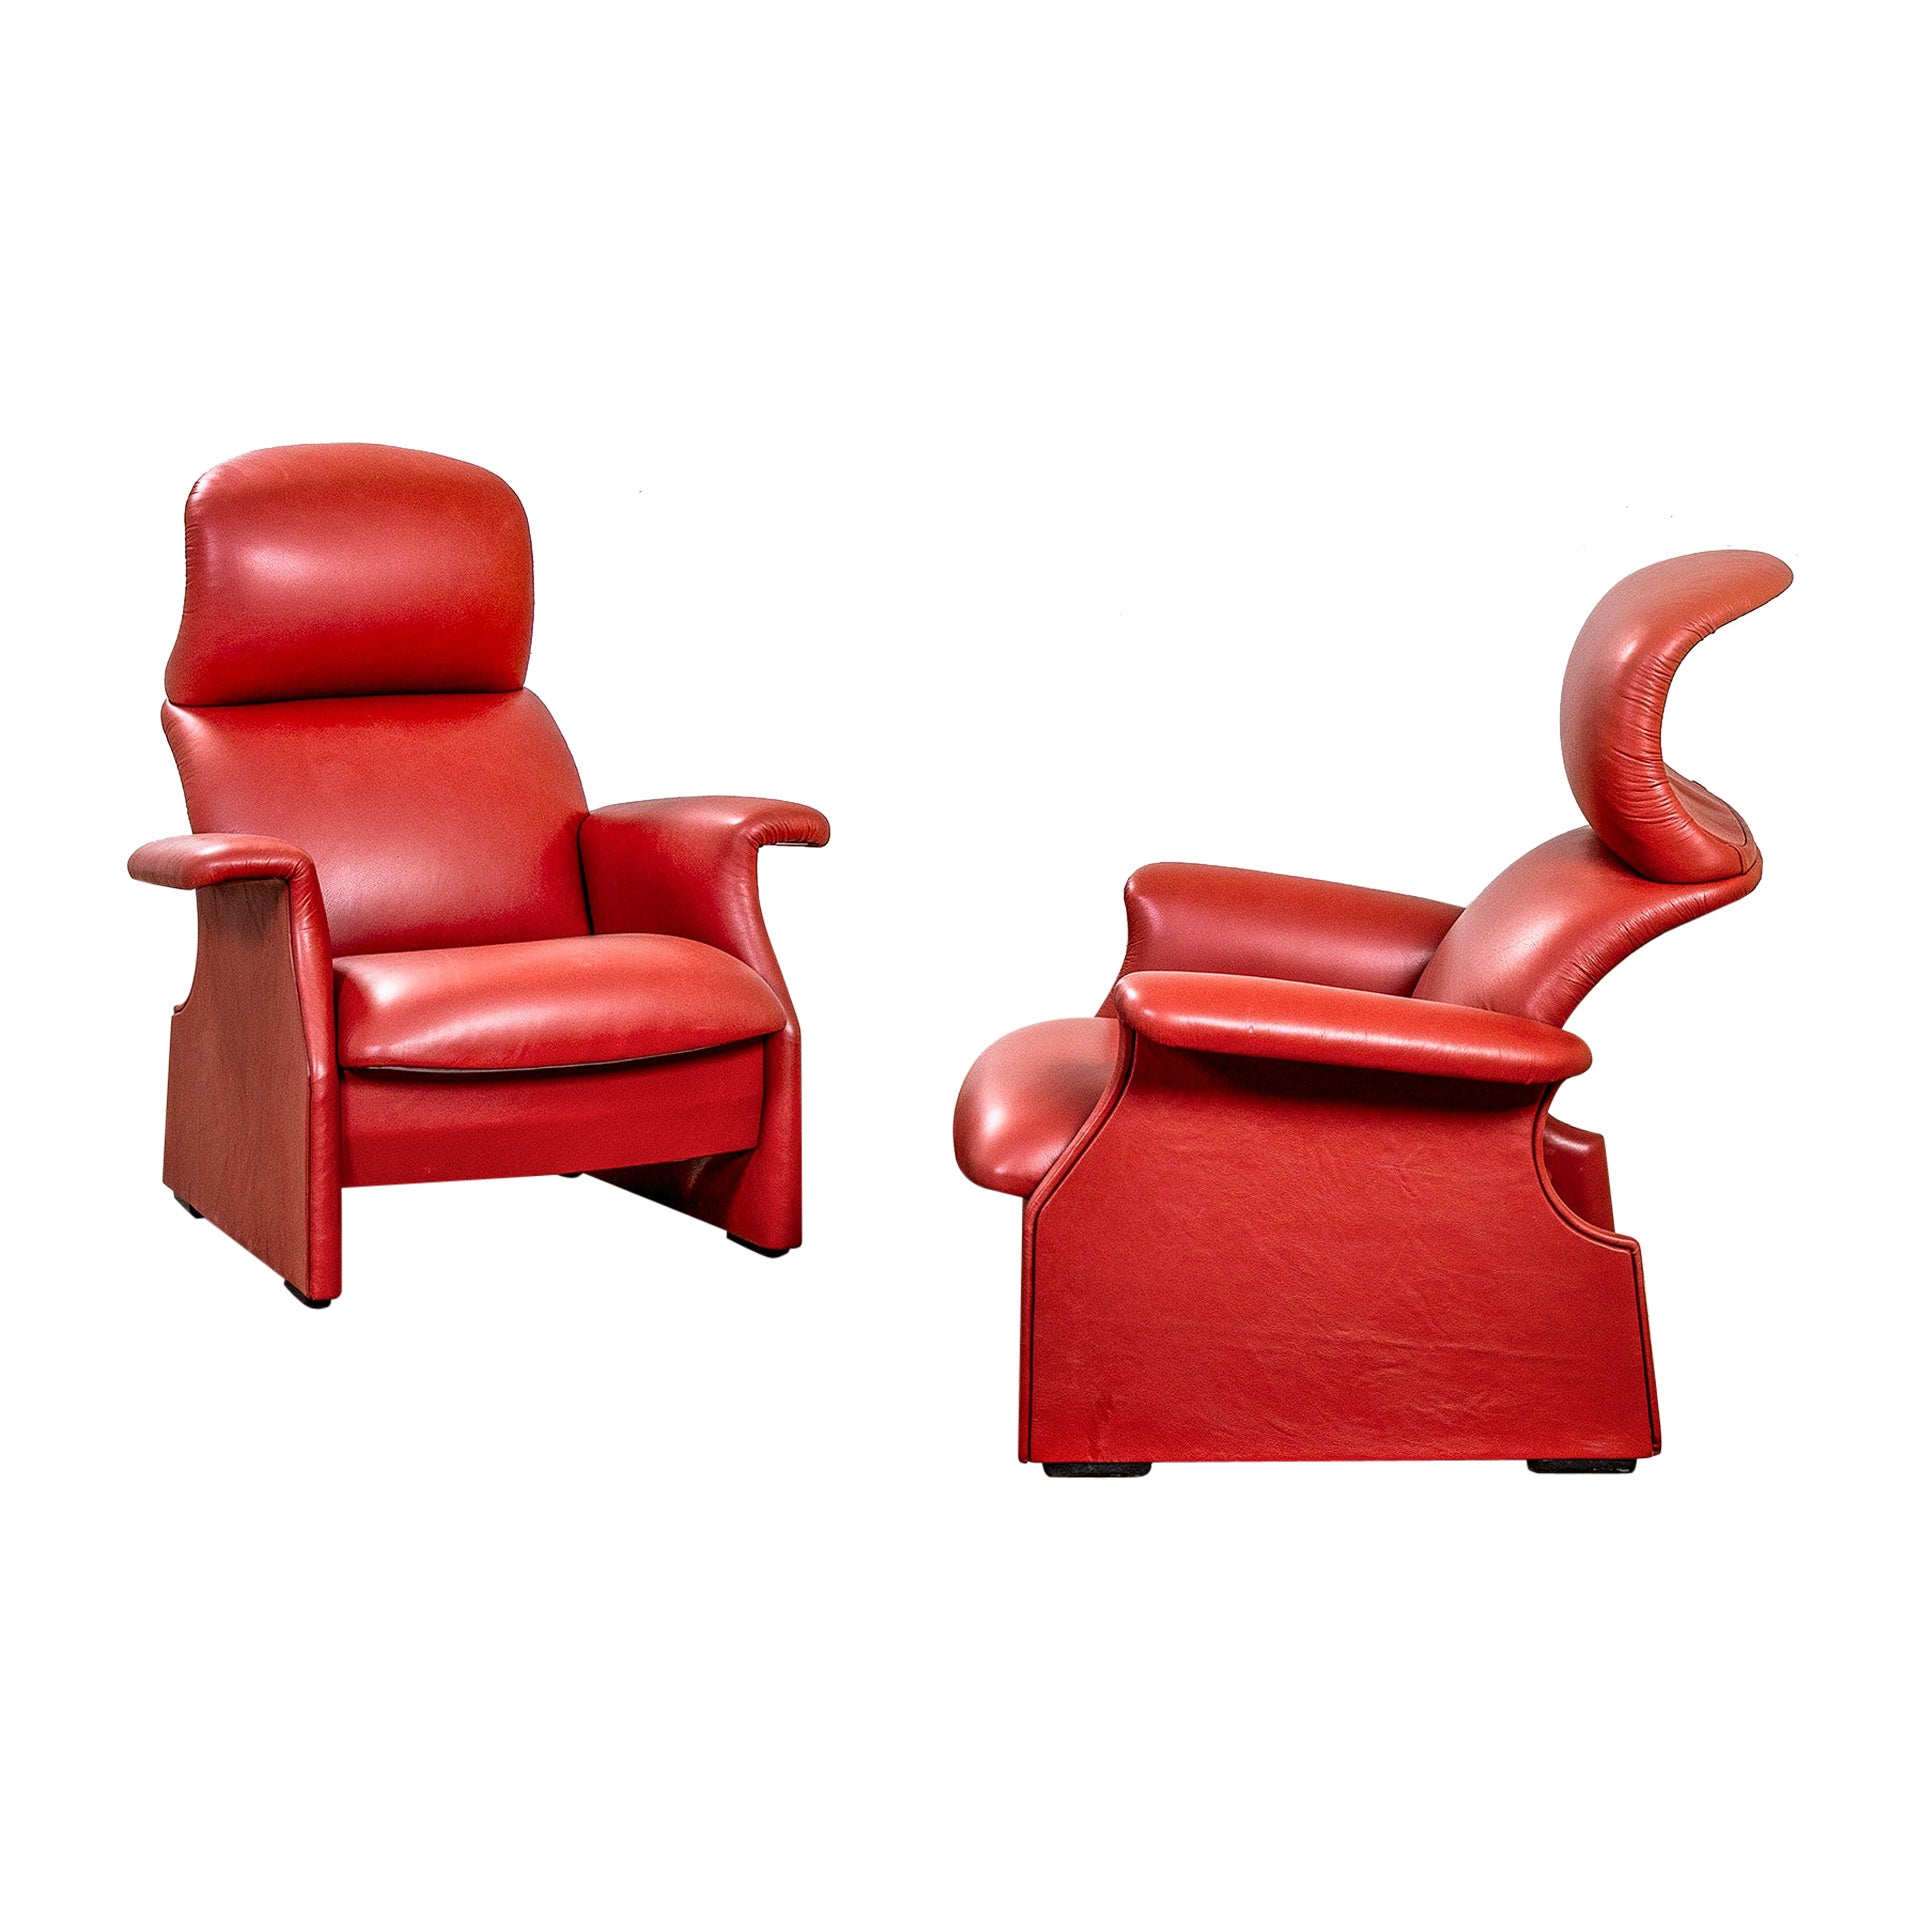 20th Century Gavina Studio Pair of Armchairs mod. Viscontea Red Leather, 1980s For Sale